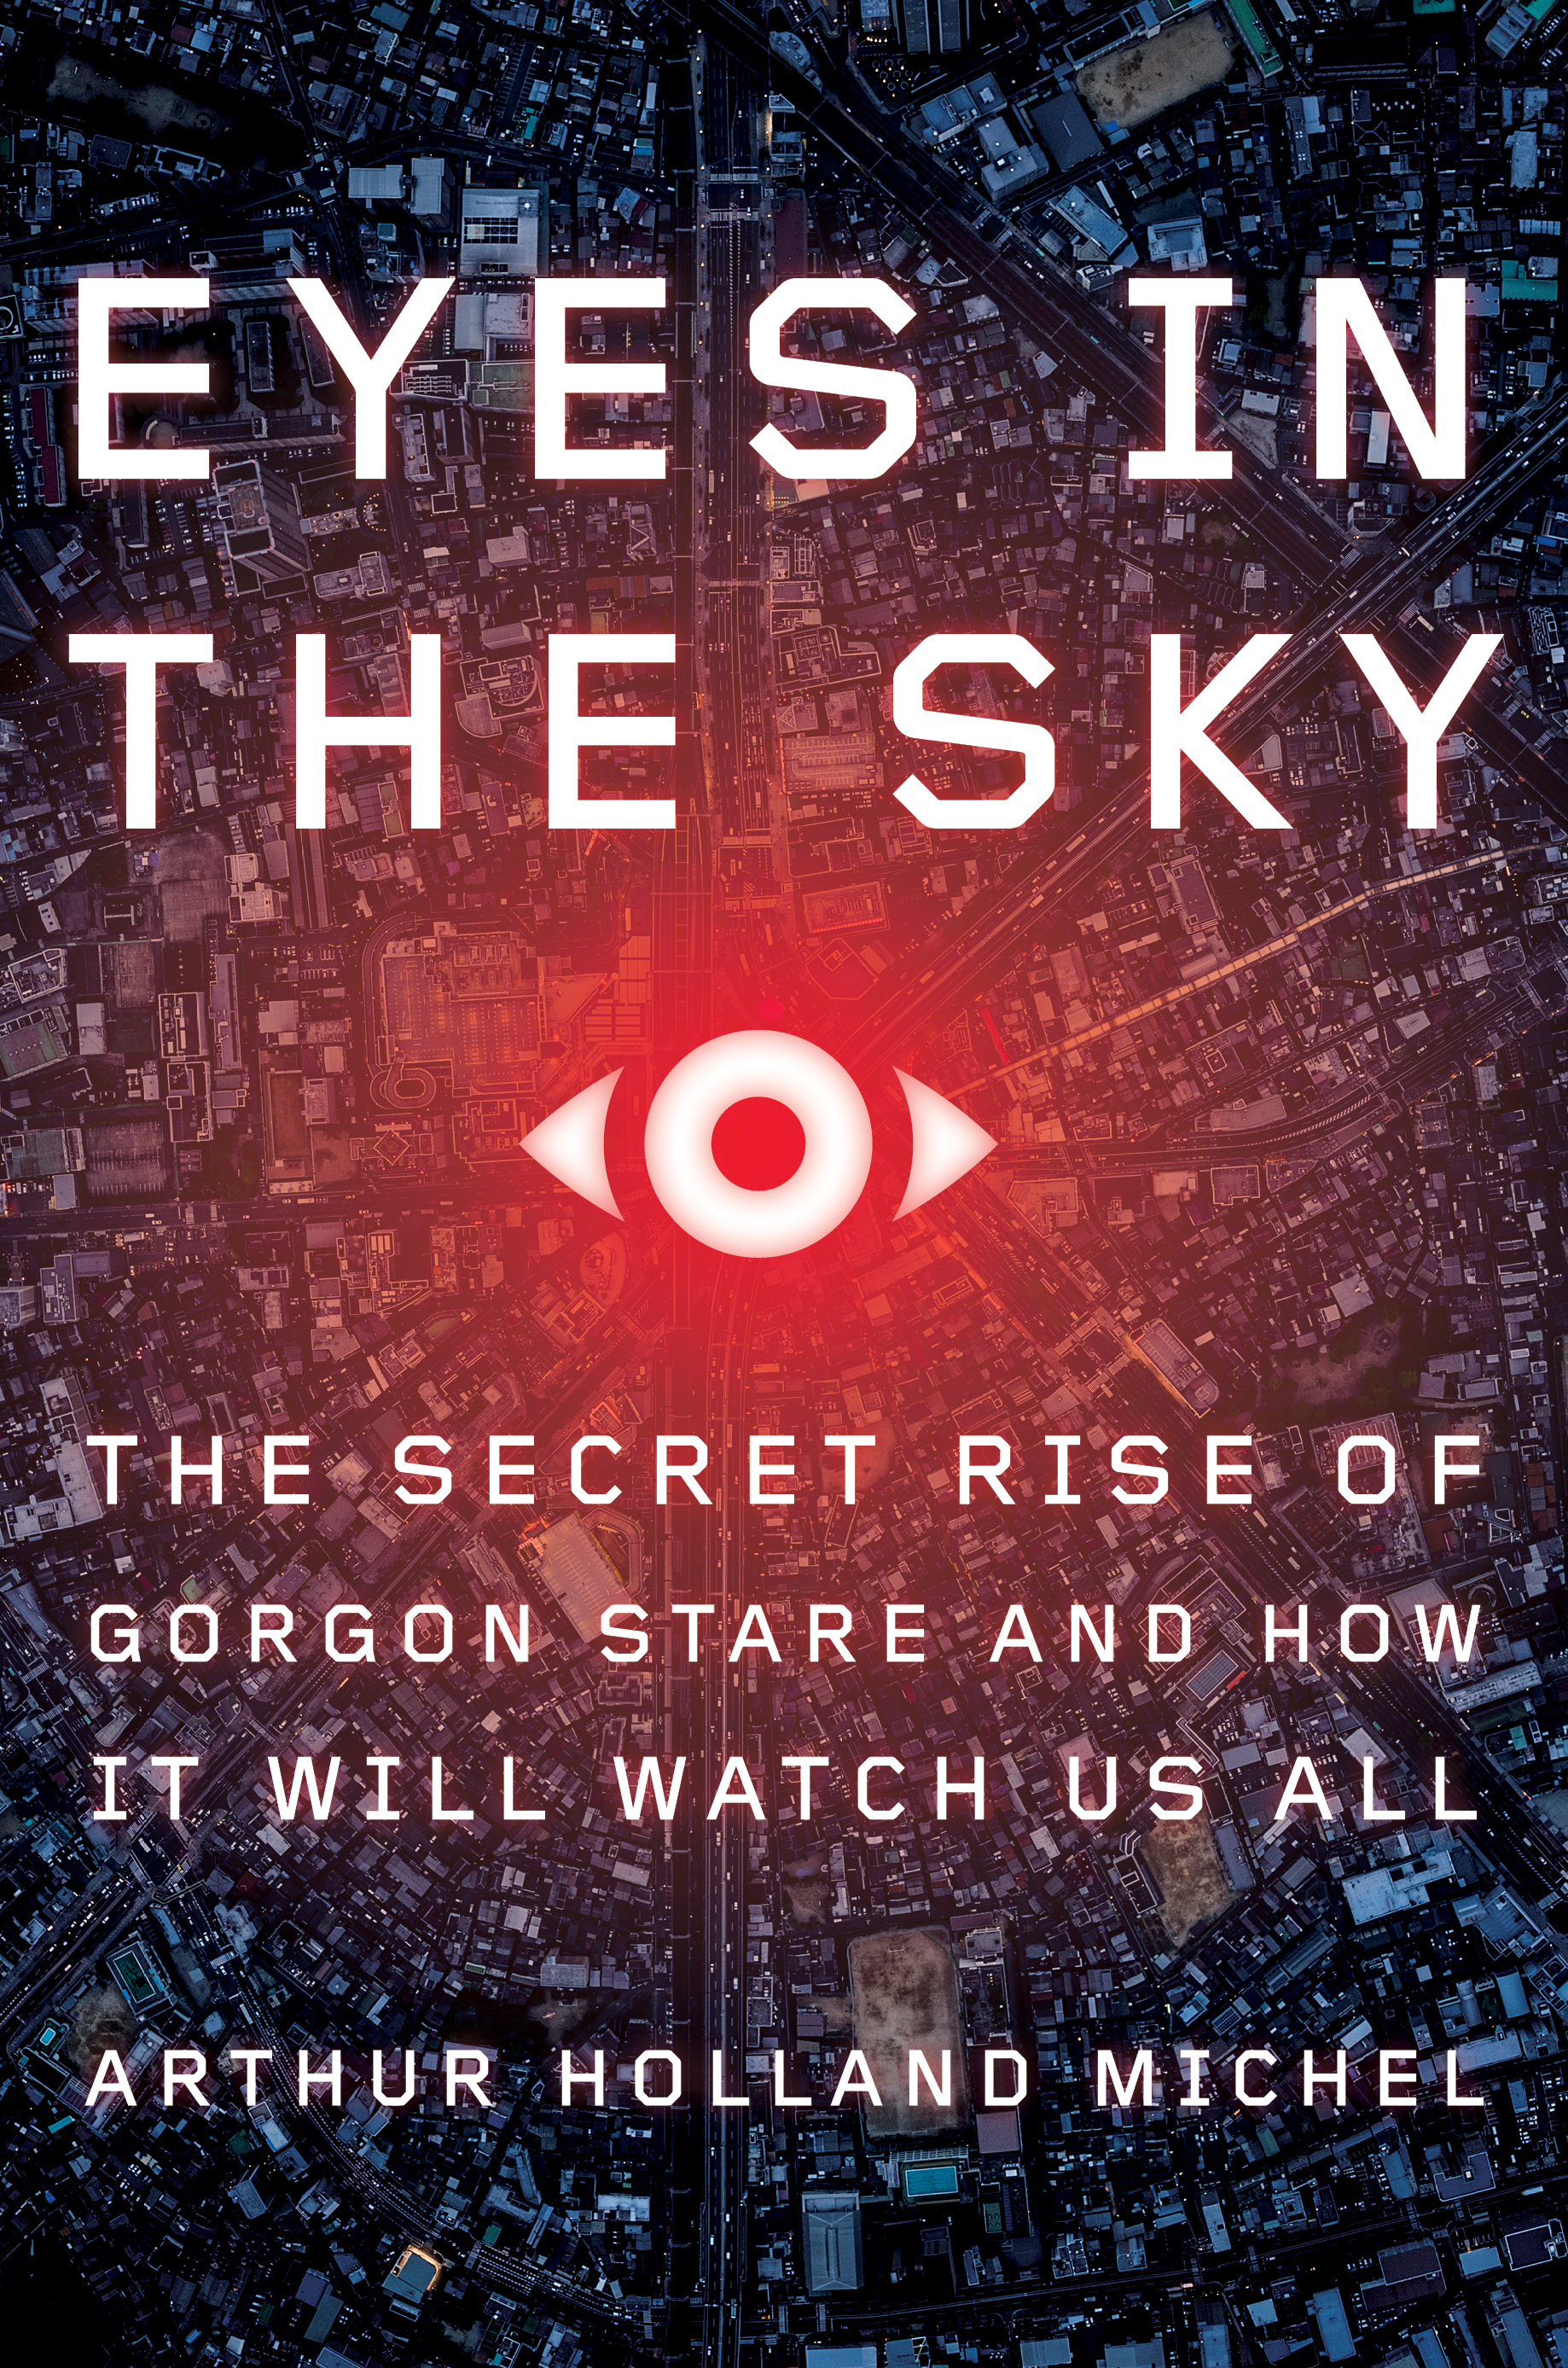 HRP Events: Arthur Holland Michel &rsquo;13 reads from his new book&nbsp;Eyes in the Sky: The Secret Rise of Gorgon Stare and How It Will Watch Us All&nbsp;(2019)